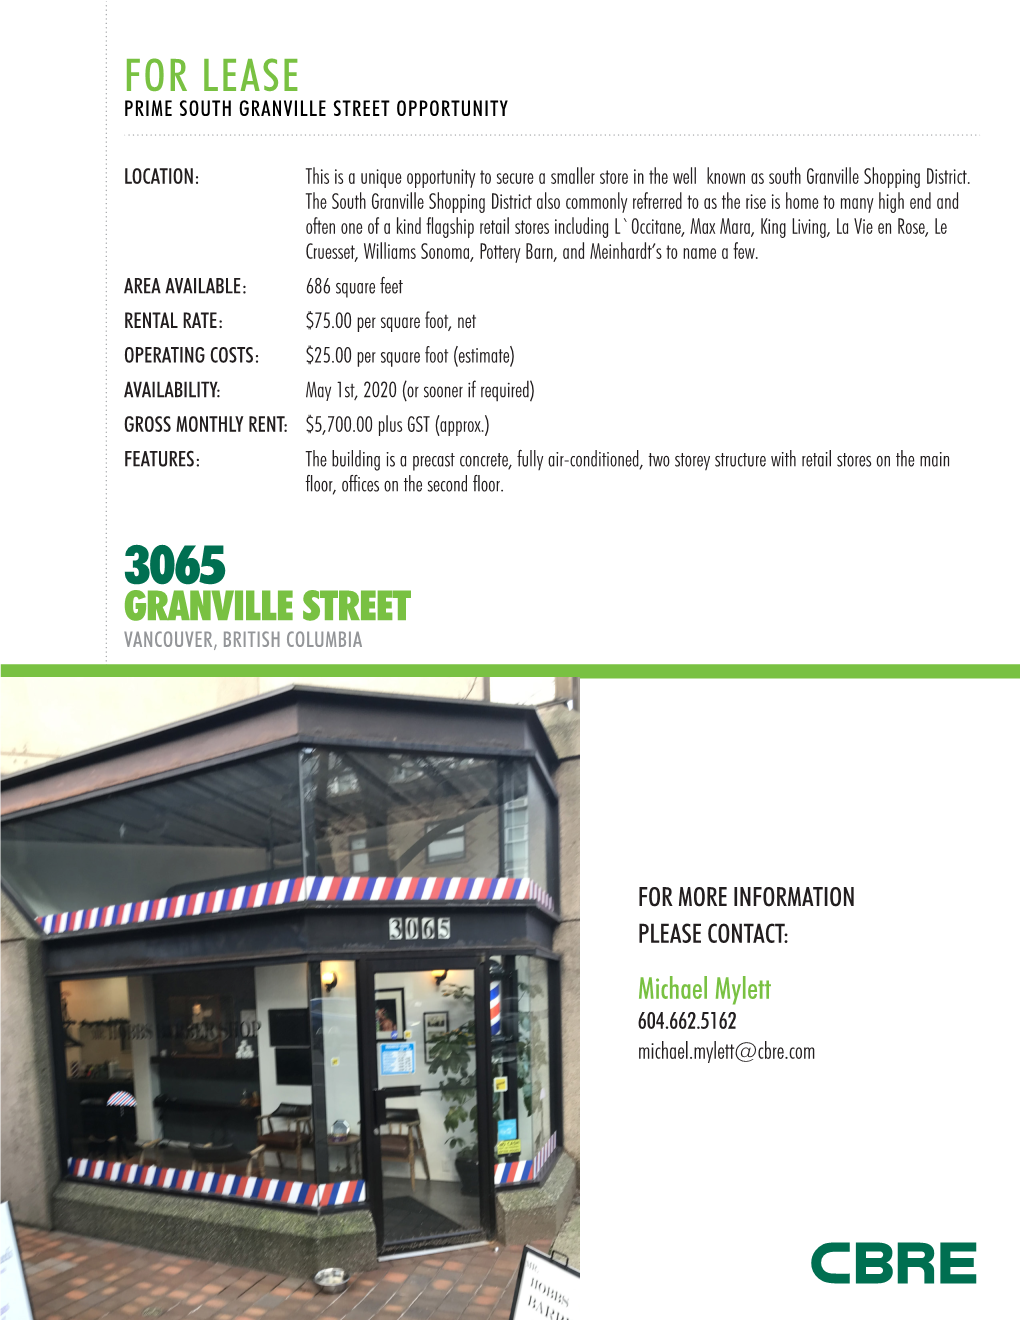 For Lease Prime South Granville Street Opportunity